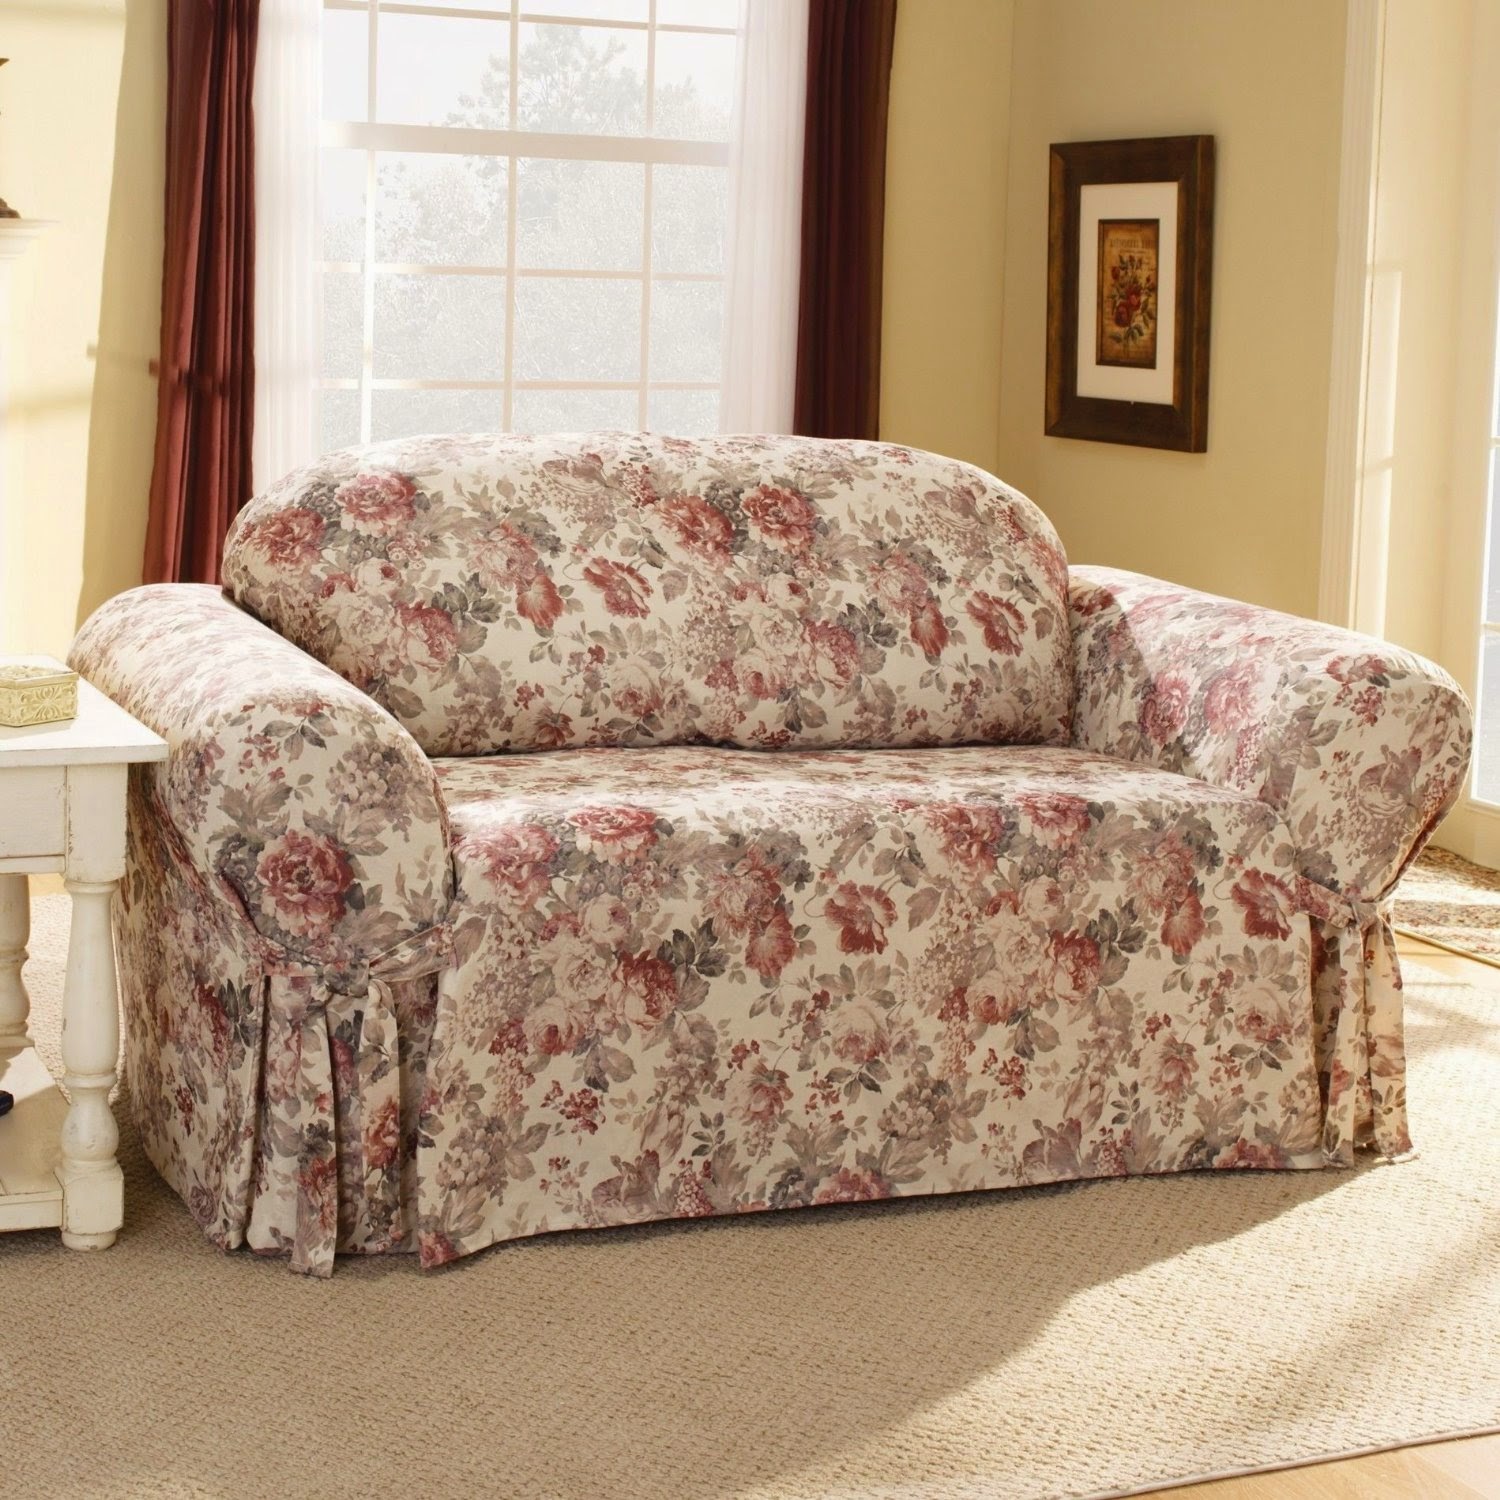 Top%2Bslipcovers%2Bfor%2Bsofas%2Bwith%2Bcushions%2Bseparate%2B%233.JPG